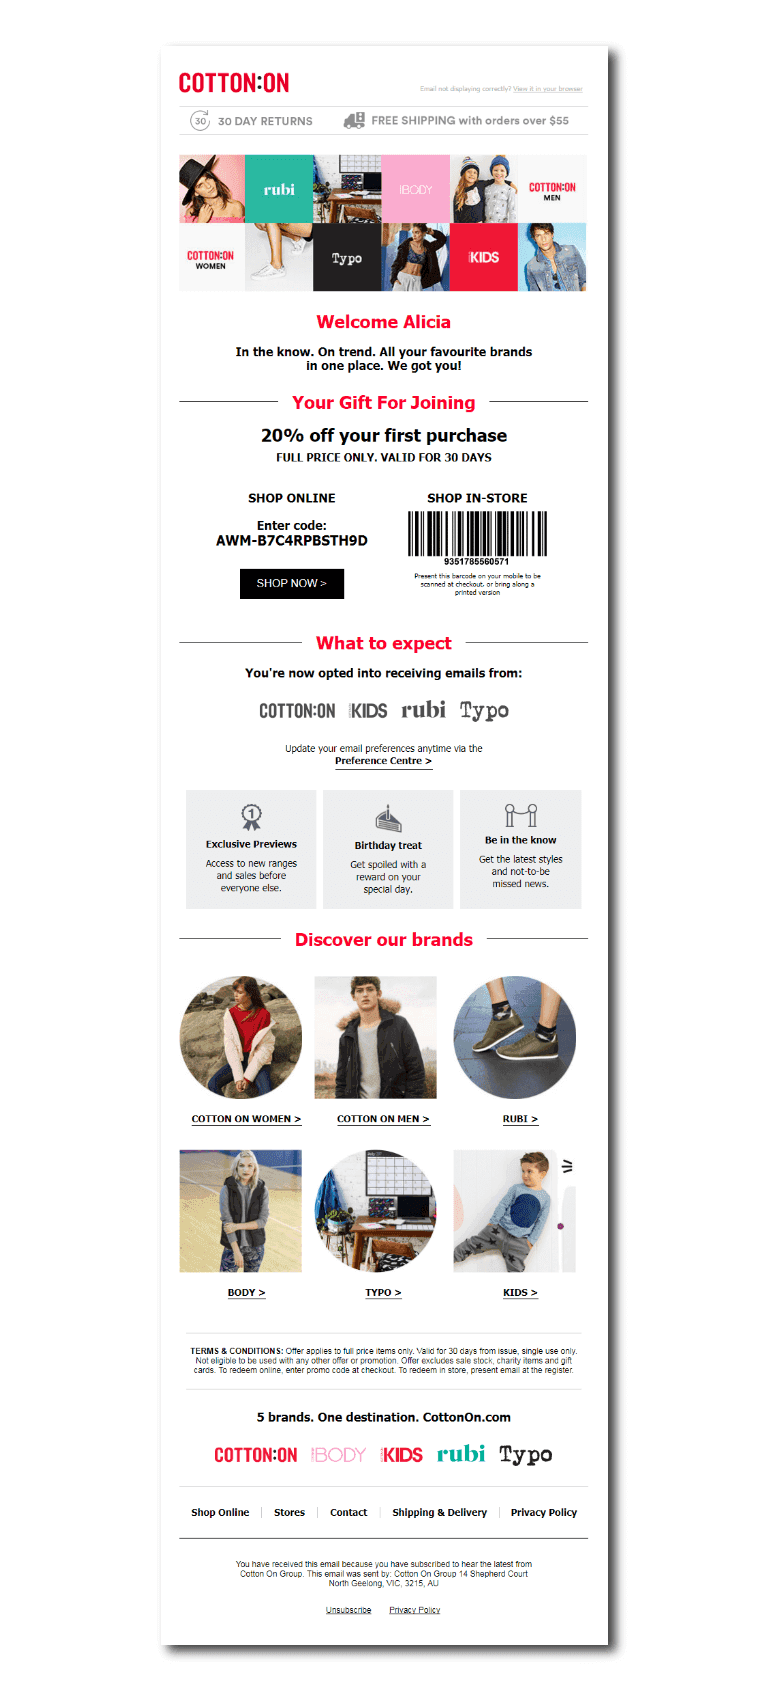 Example of a welcome email from Cotton On